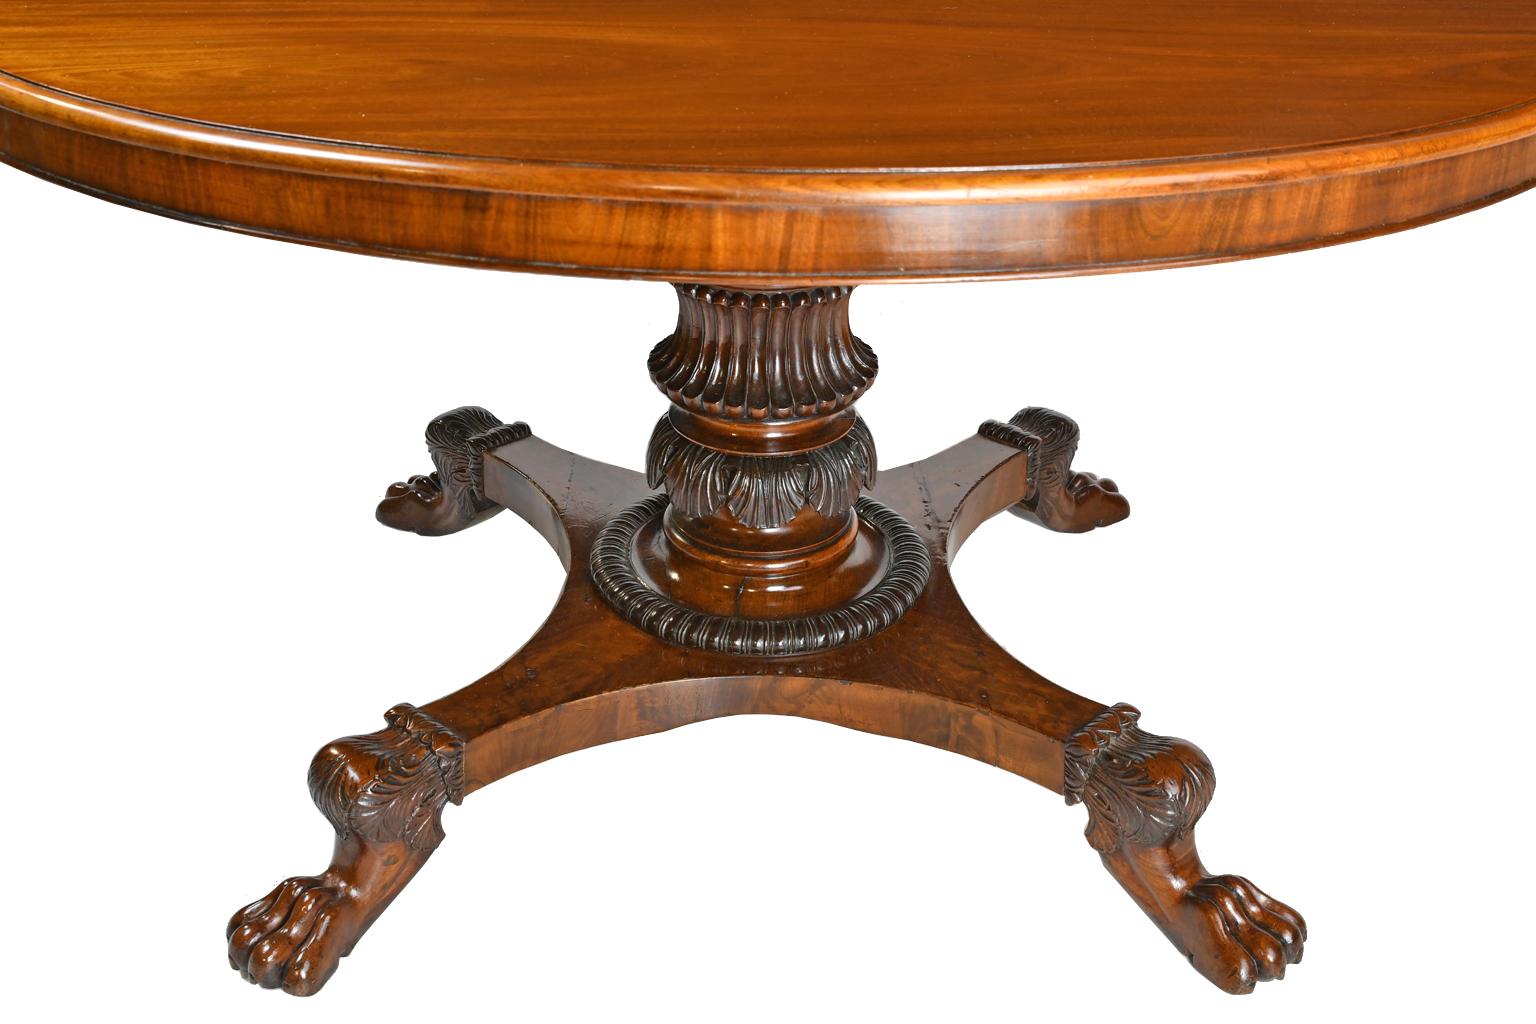 Empire Christian VIII Round Foyer Table with Center Pedestal in Mahogany, circa 1830